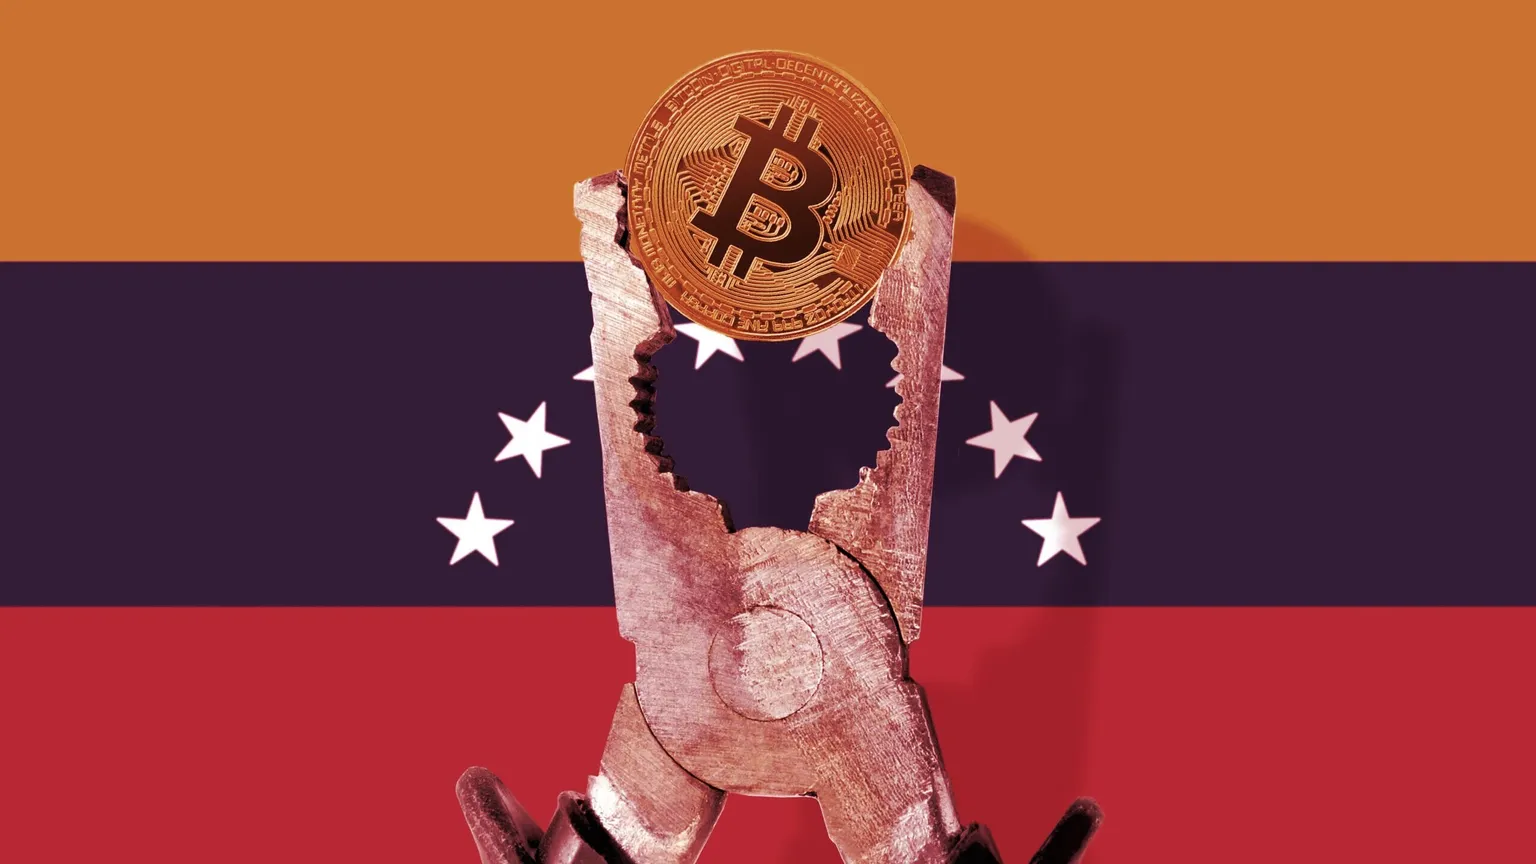 Authorities in Venezuela are putting the squeeze on cryptocurrency mining. Image: Shutterstock